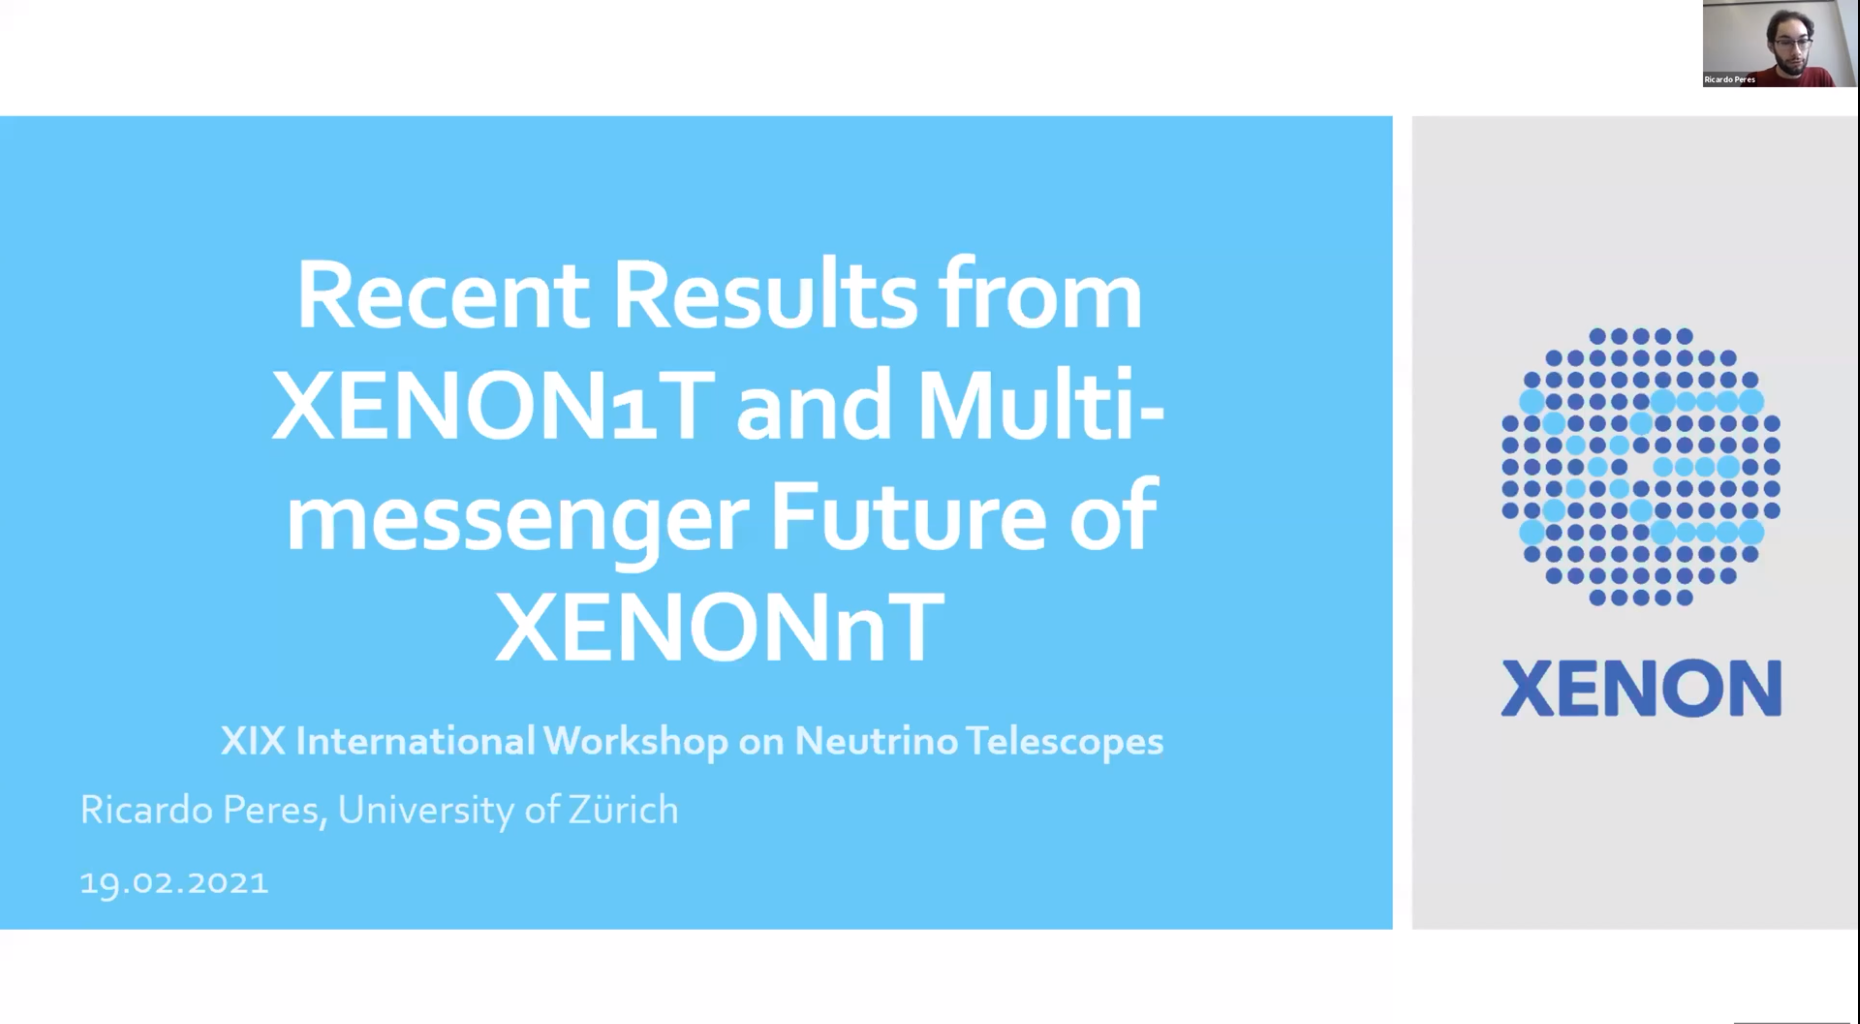 The PhD student Ricardo Peres presenting the talk “Recent Results from XENON1T and Multi-messenger Future of XENONnT” at NuTel 2021